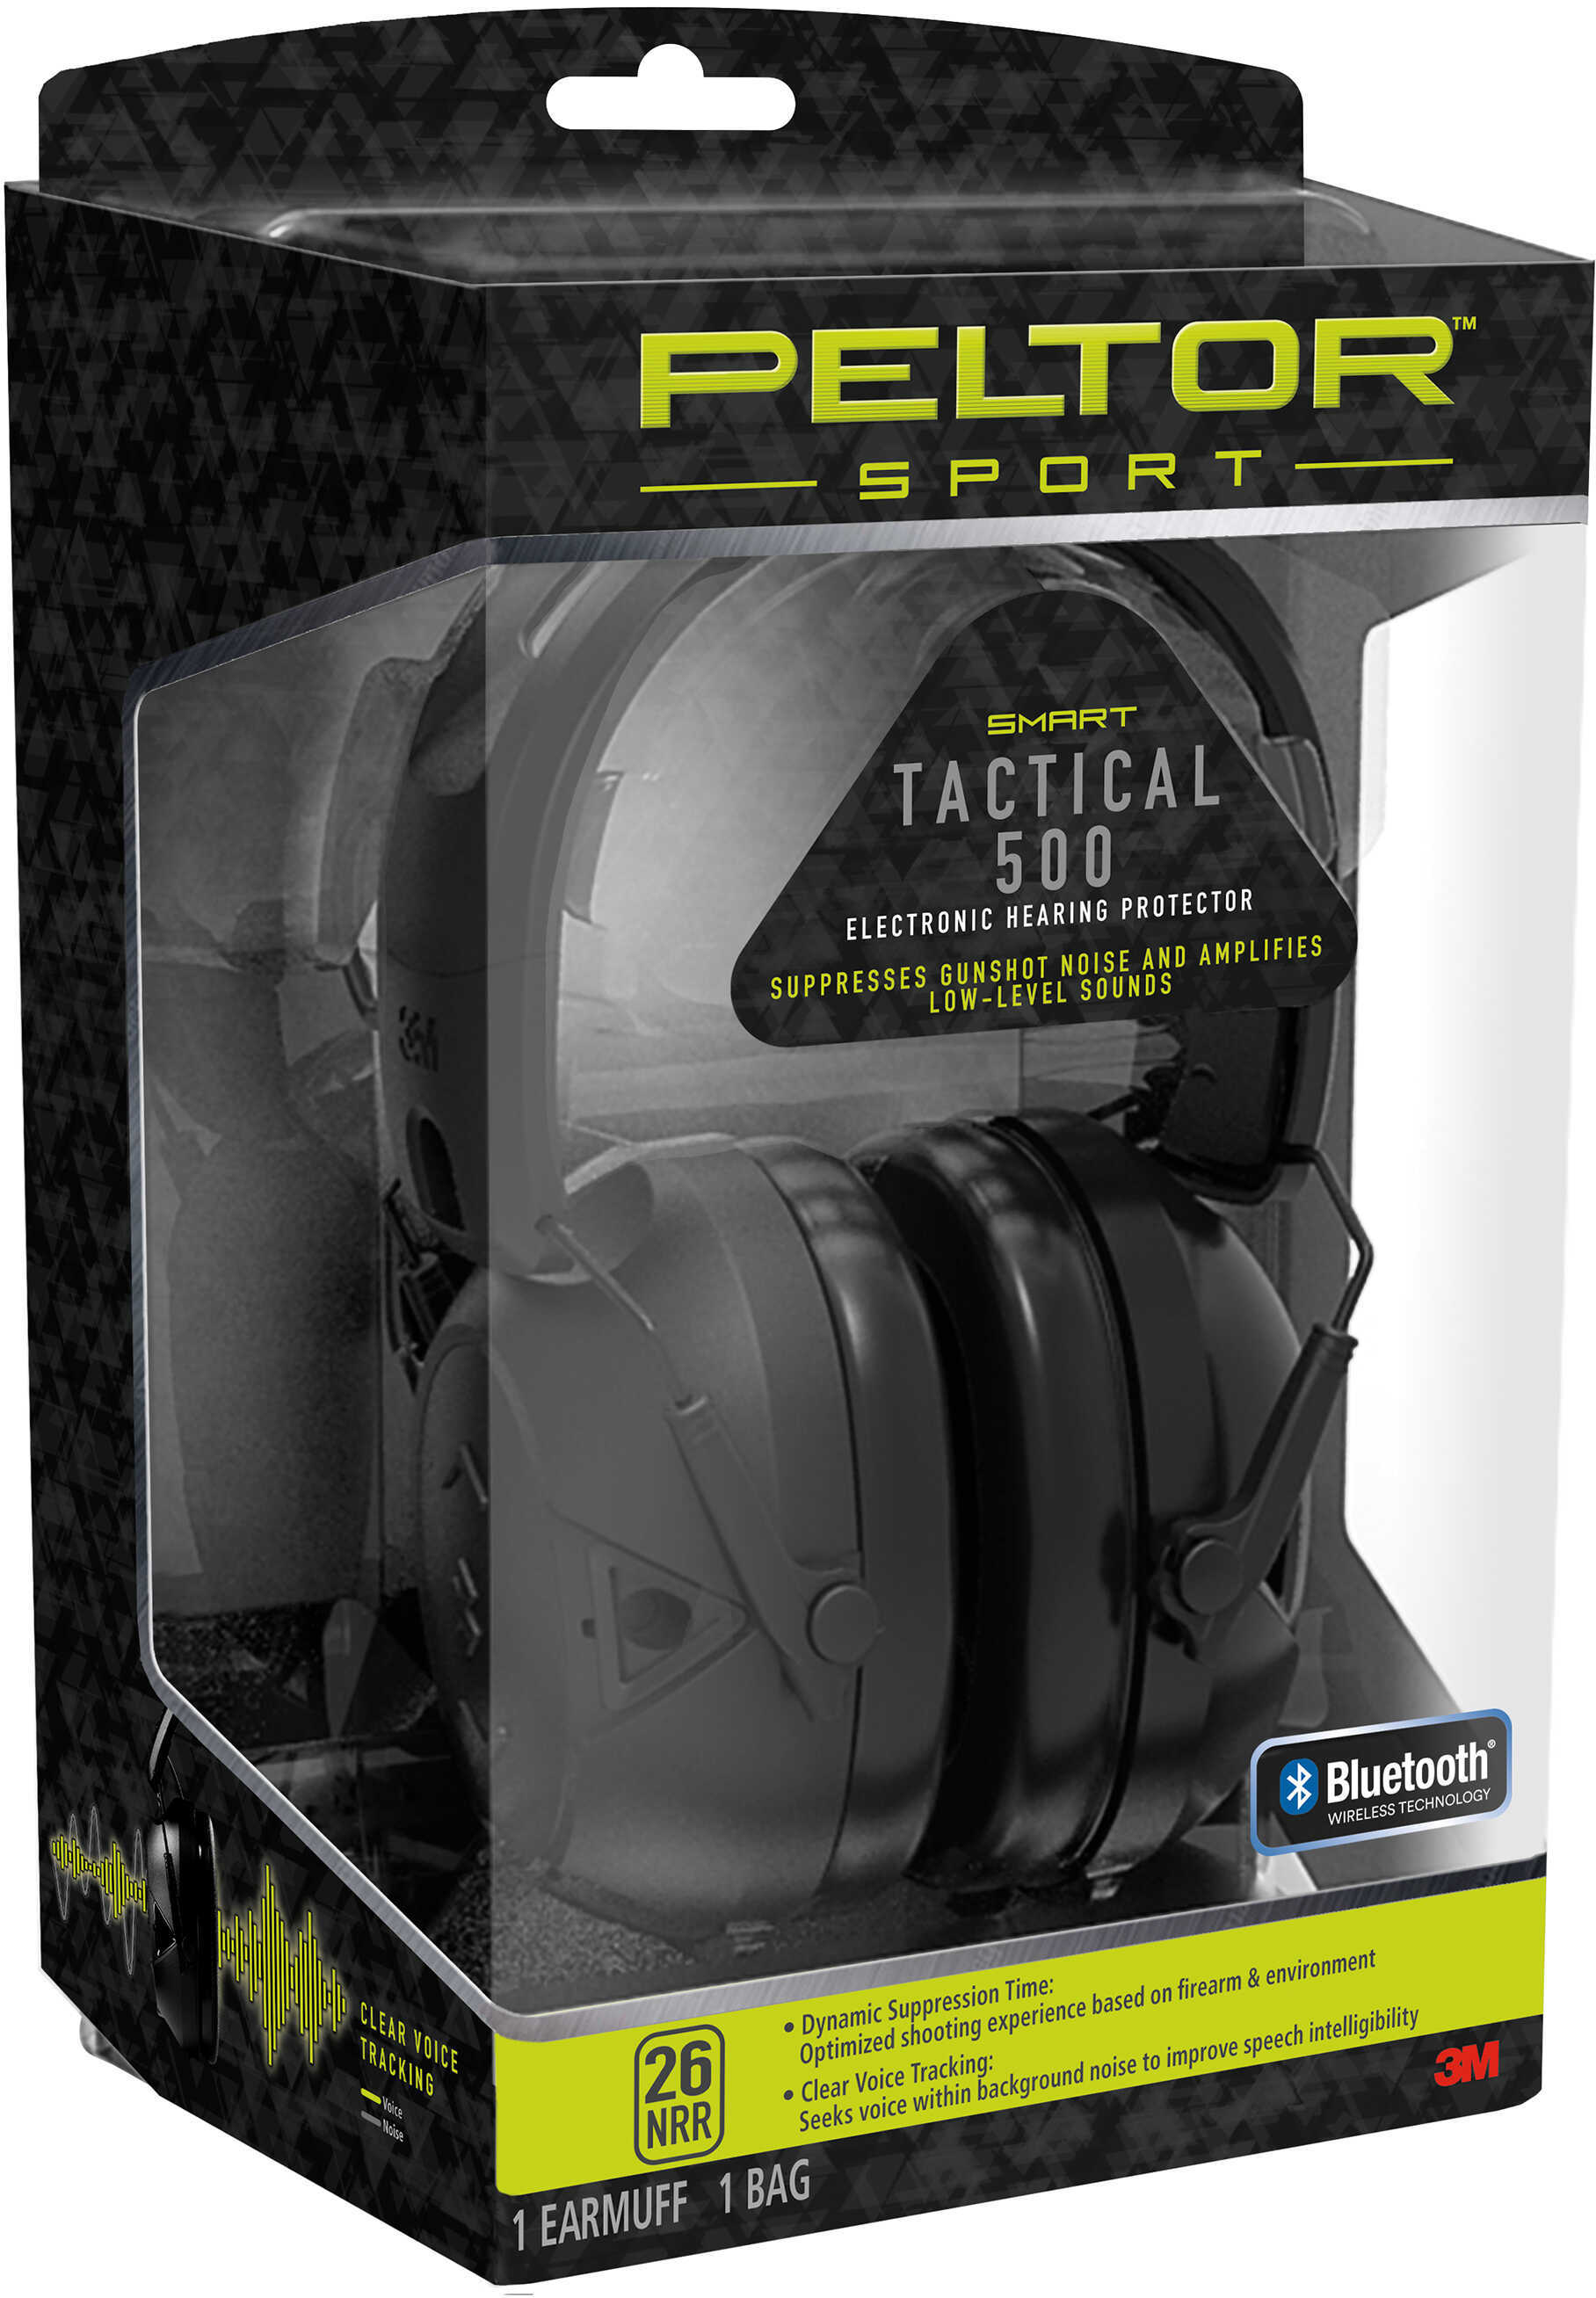 3M Peltor Sport Tactical 500 Electronic Hearing Protection